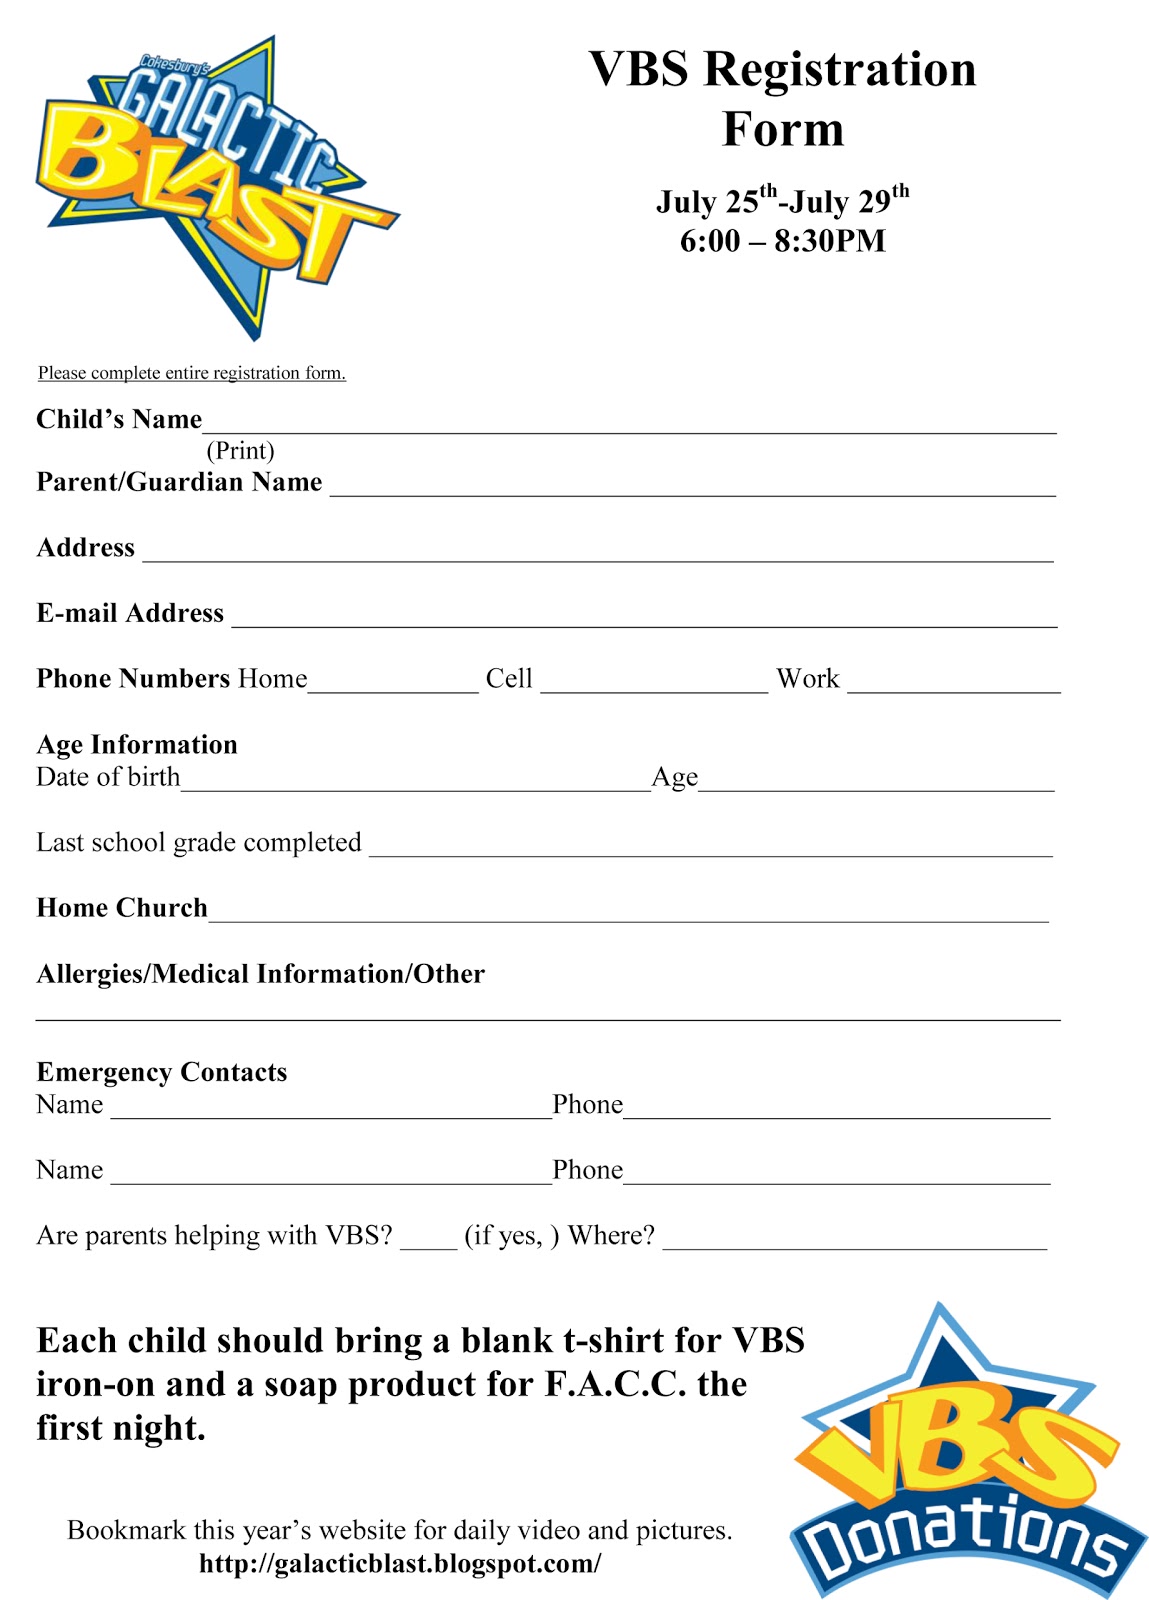 ... registration form. VBS will be July 25-29, From 6-8:30pm. Registration